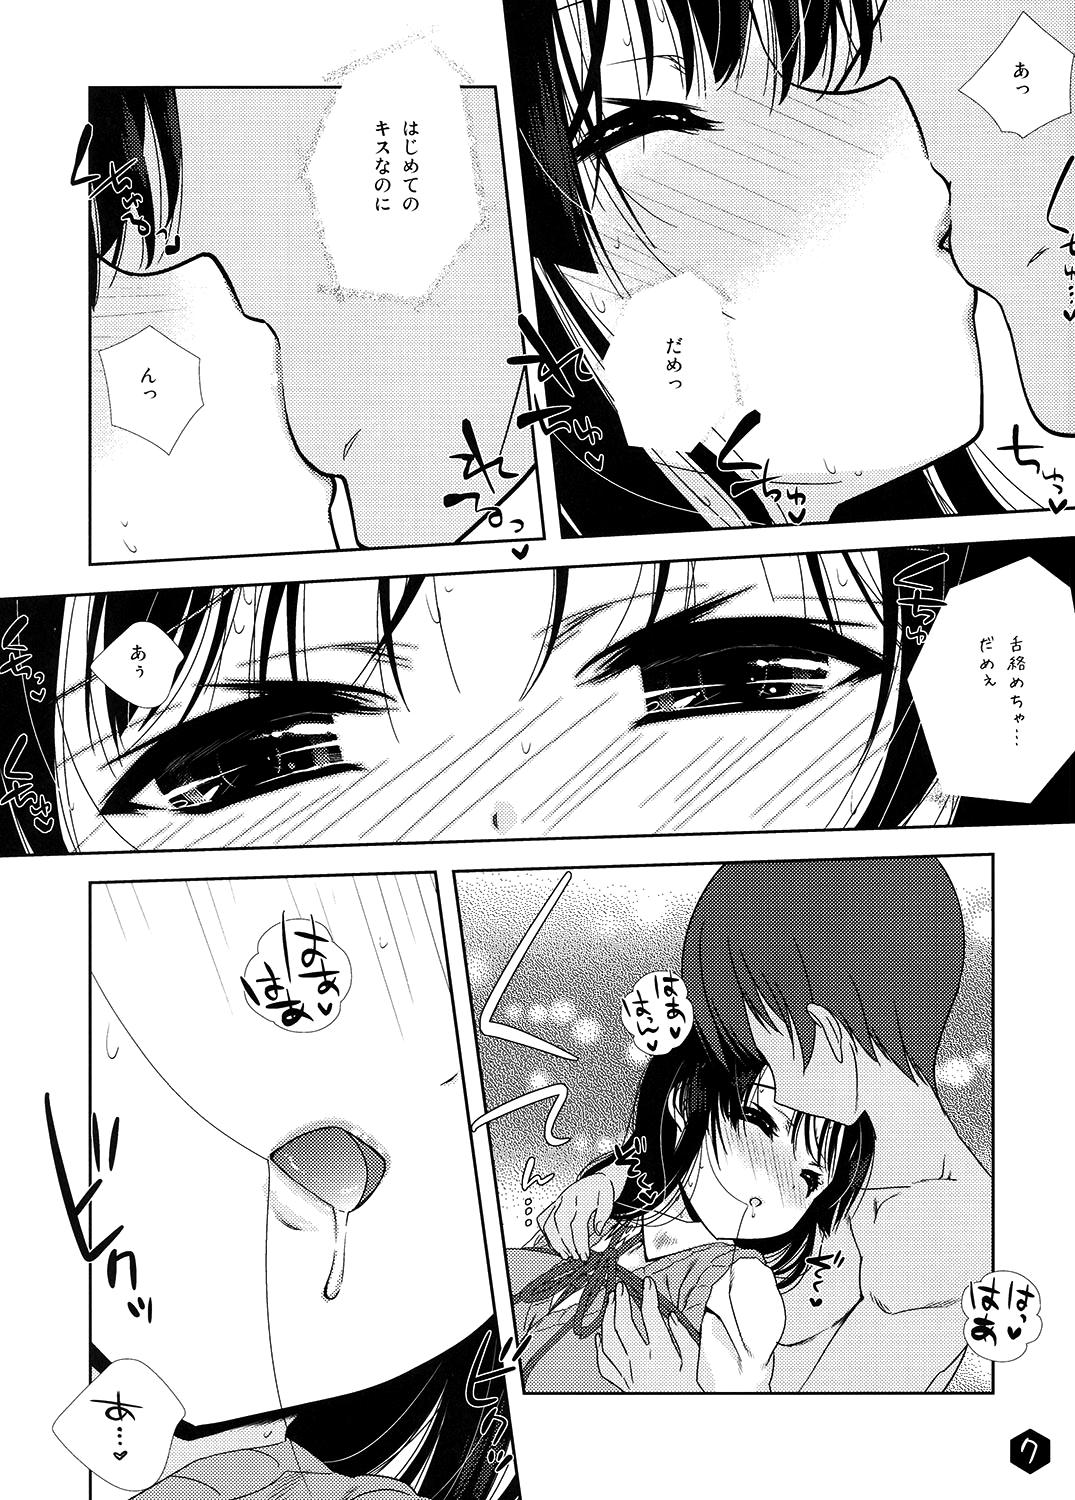 Best Blow Job Ever Mio-tan! 3 - K on Bitch - Page 7